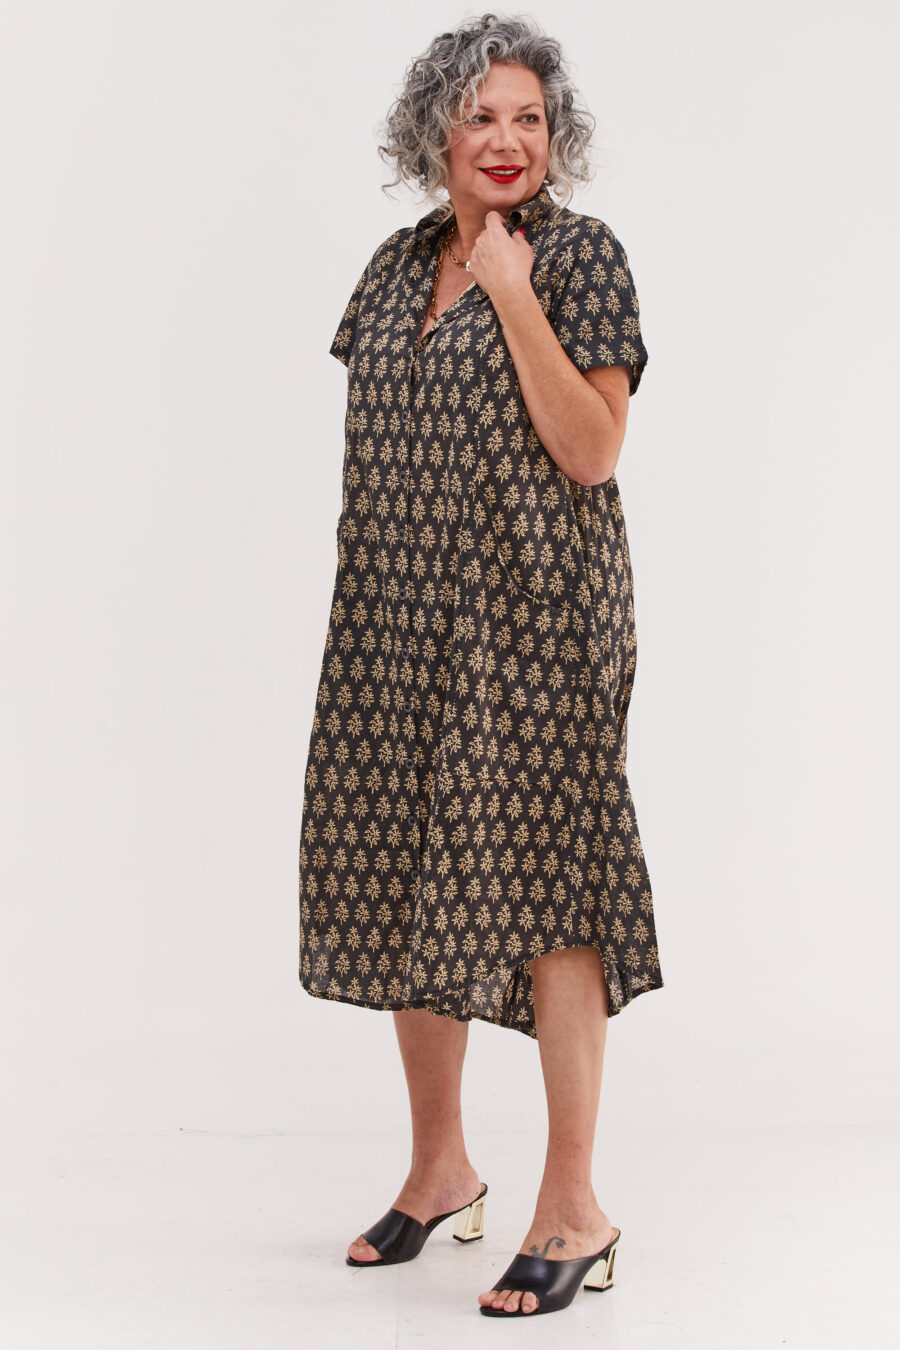 Aiya’le dress | Uniquely designed oversize dress - Tokio print, black dress with cream colored oriental print by comfort zone boutique